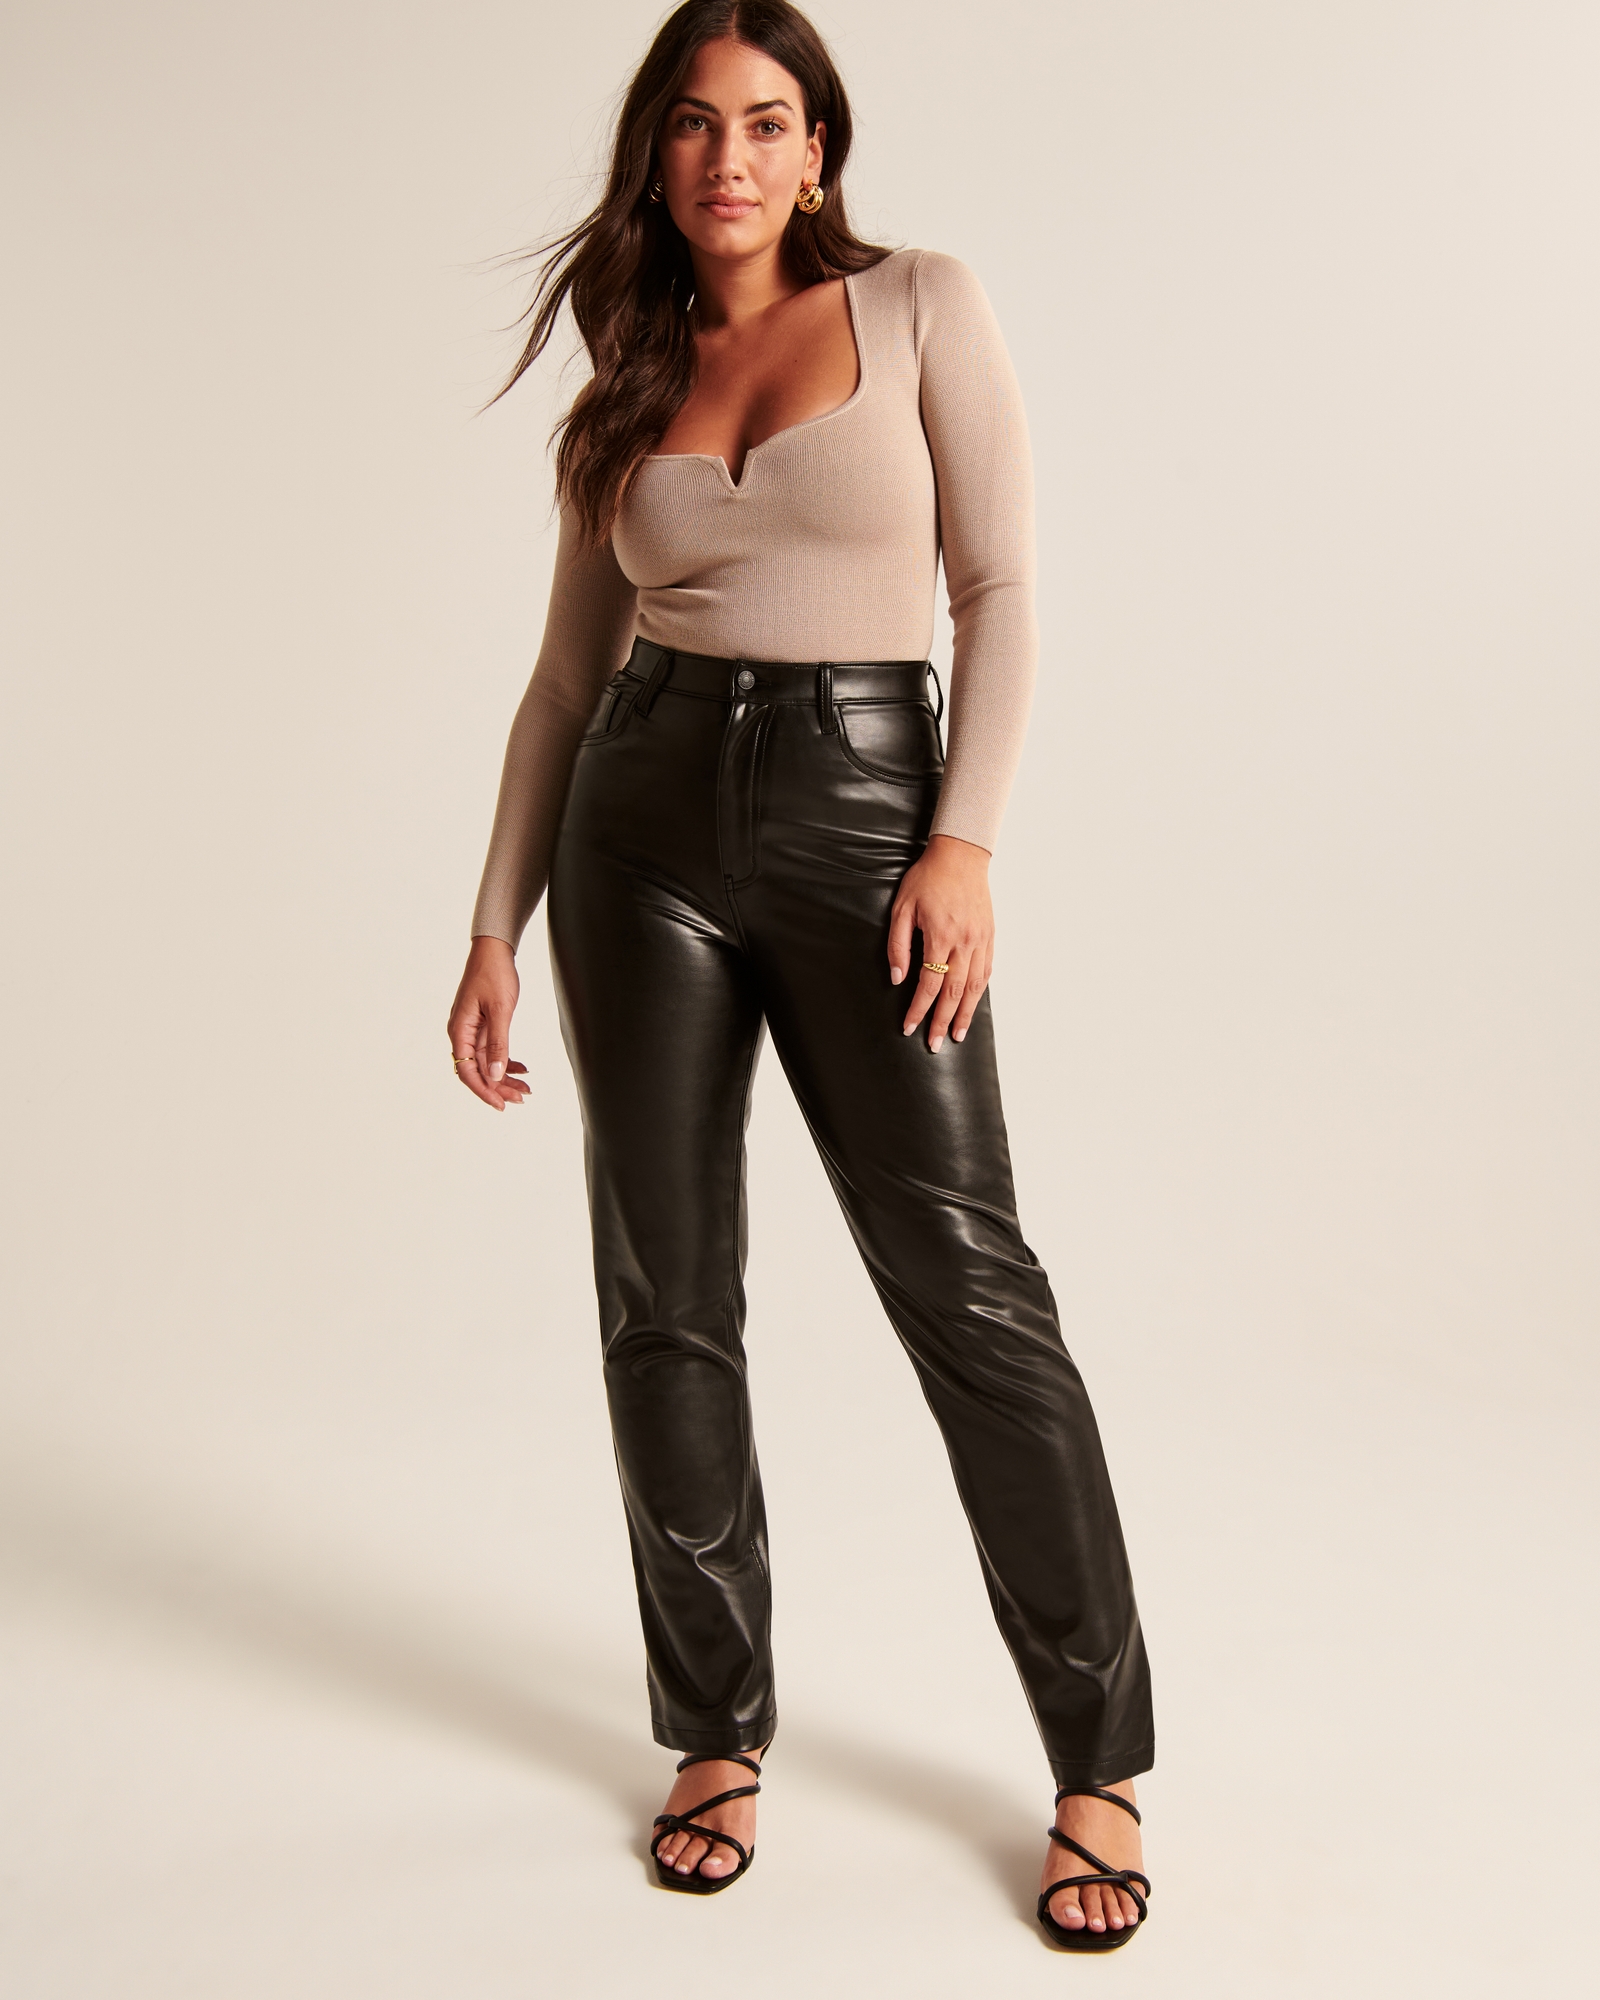 Black Leather Pants for Women, Black PU Leather Pants for Women